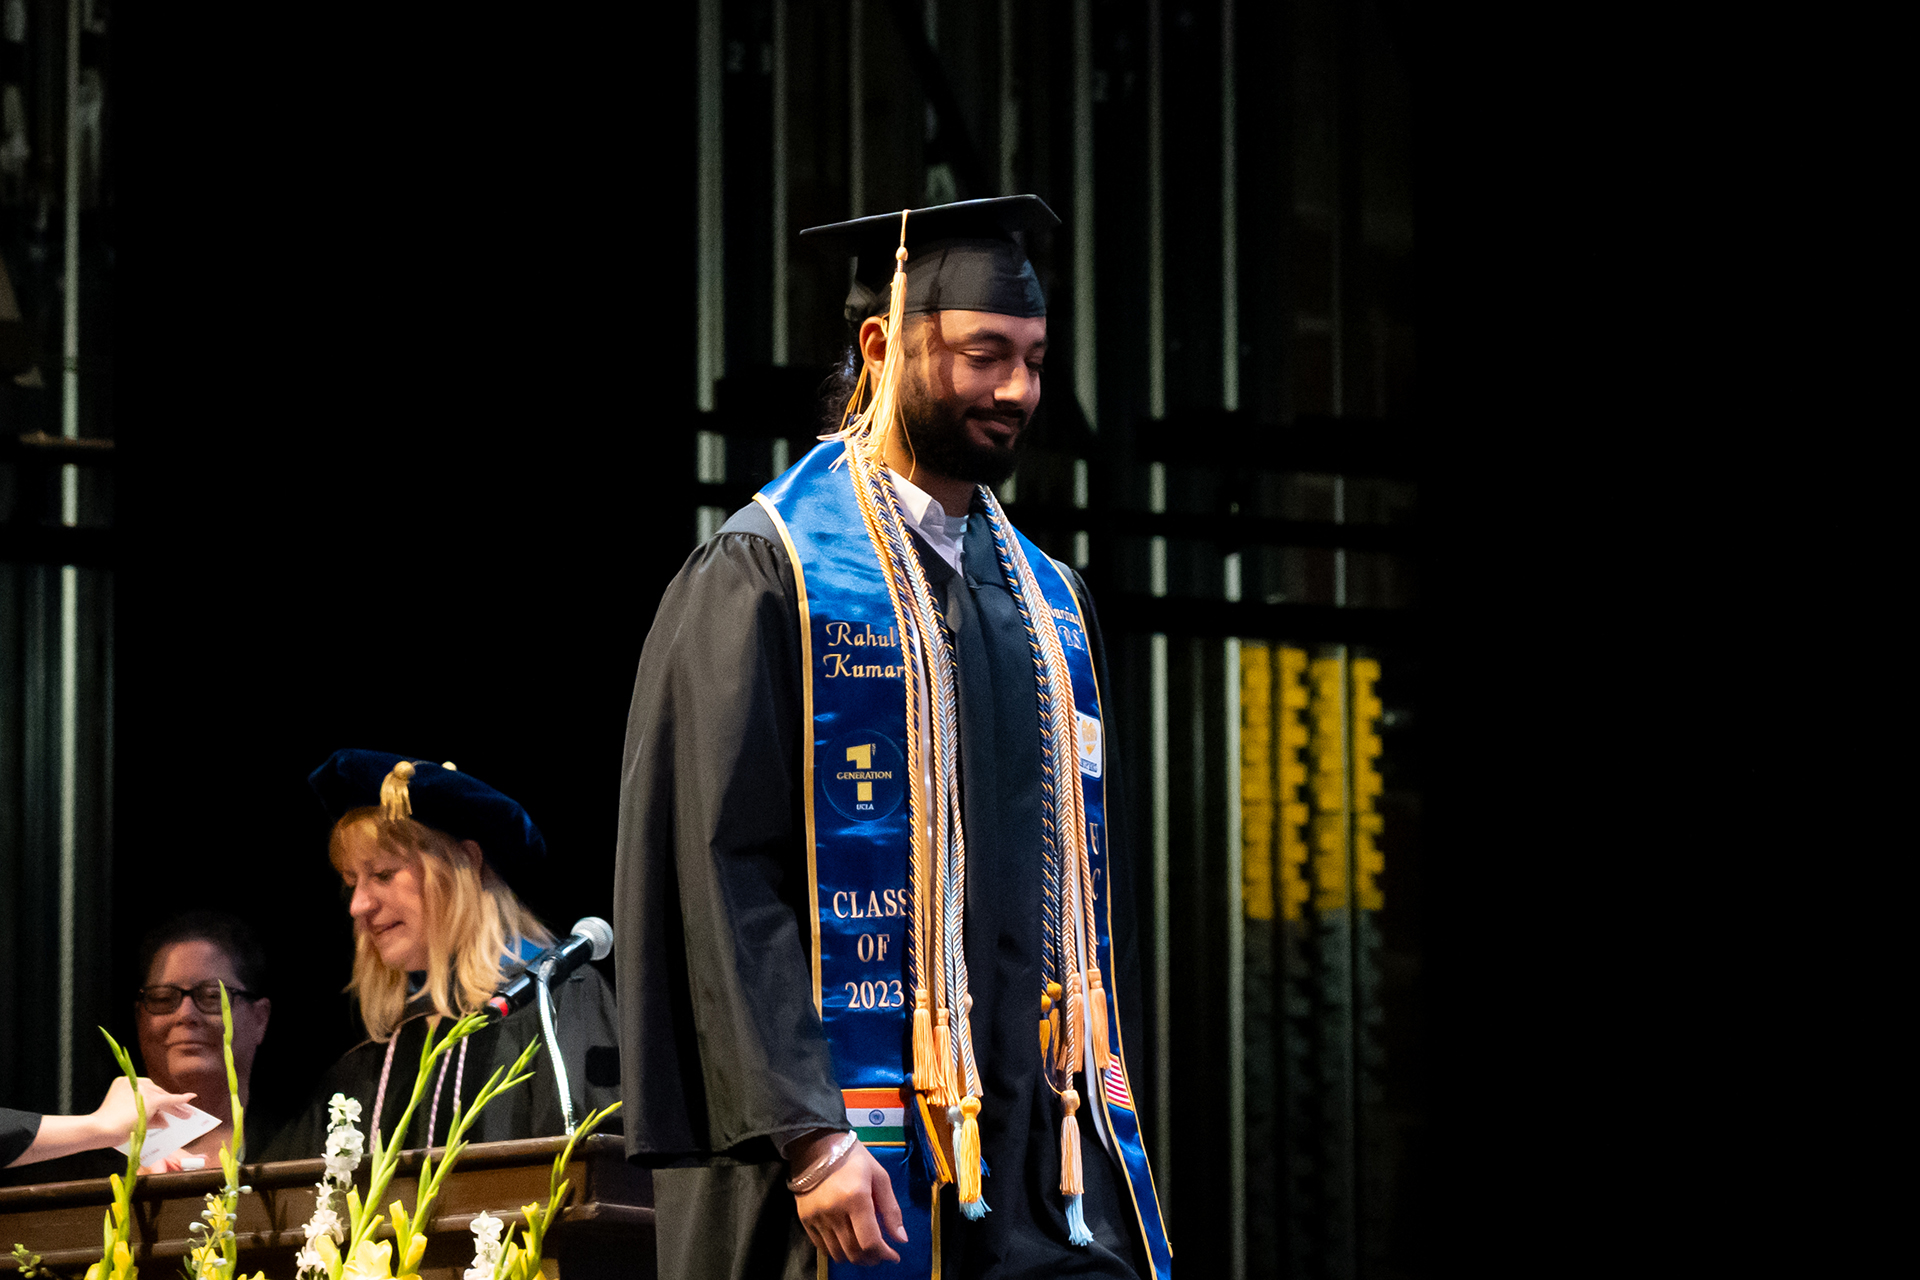 A student walking across the commencement stage